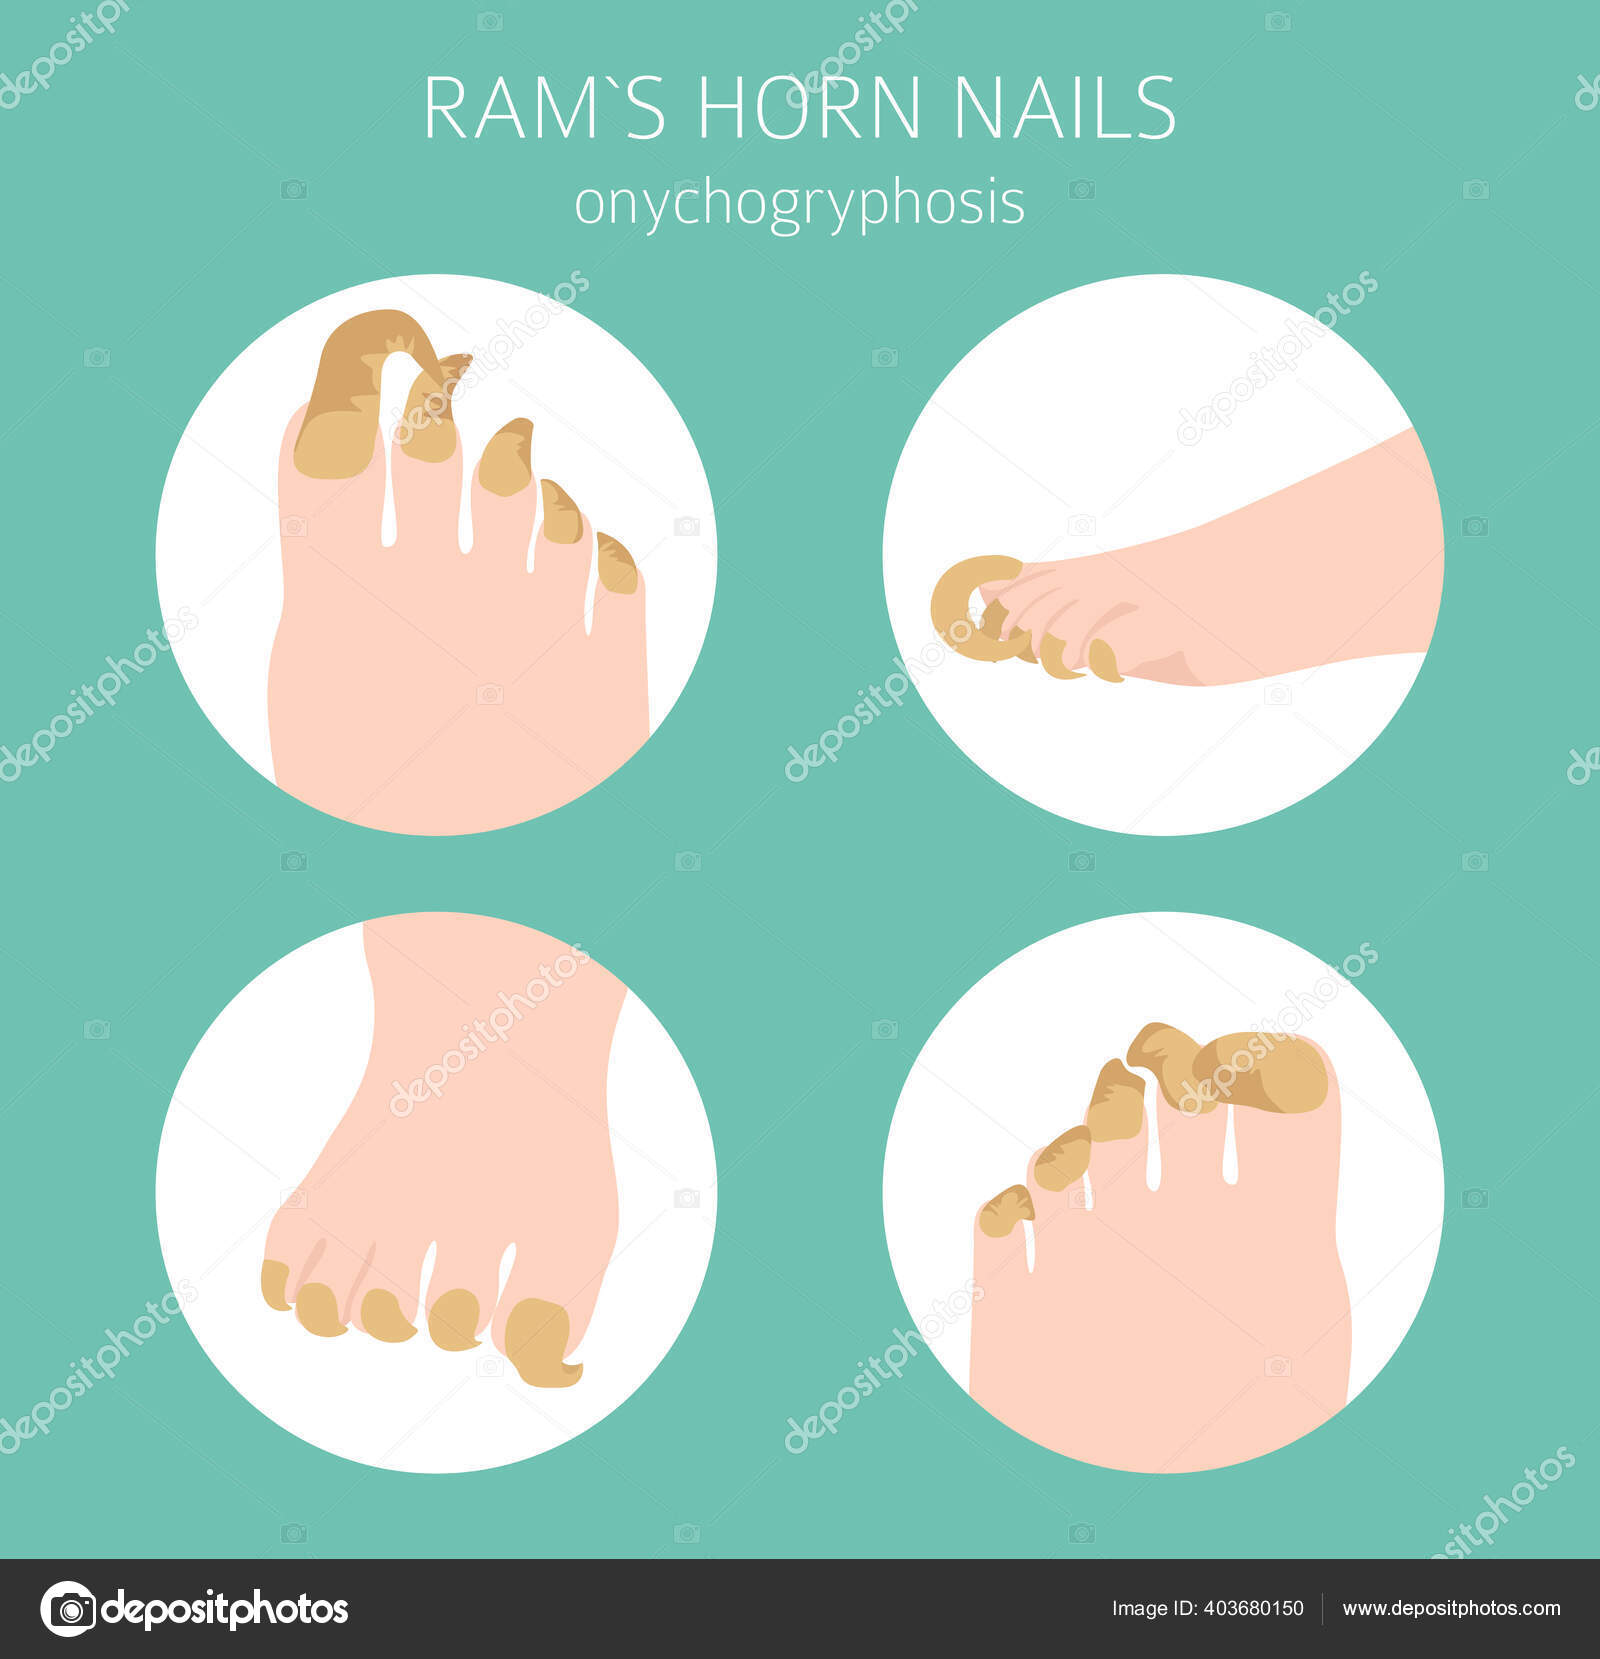 Onychogryphosis (Ram's Horn Nails): Causes & Treatment